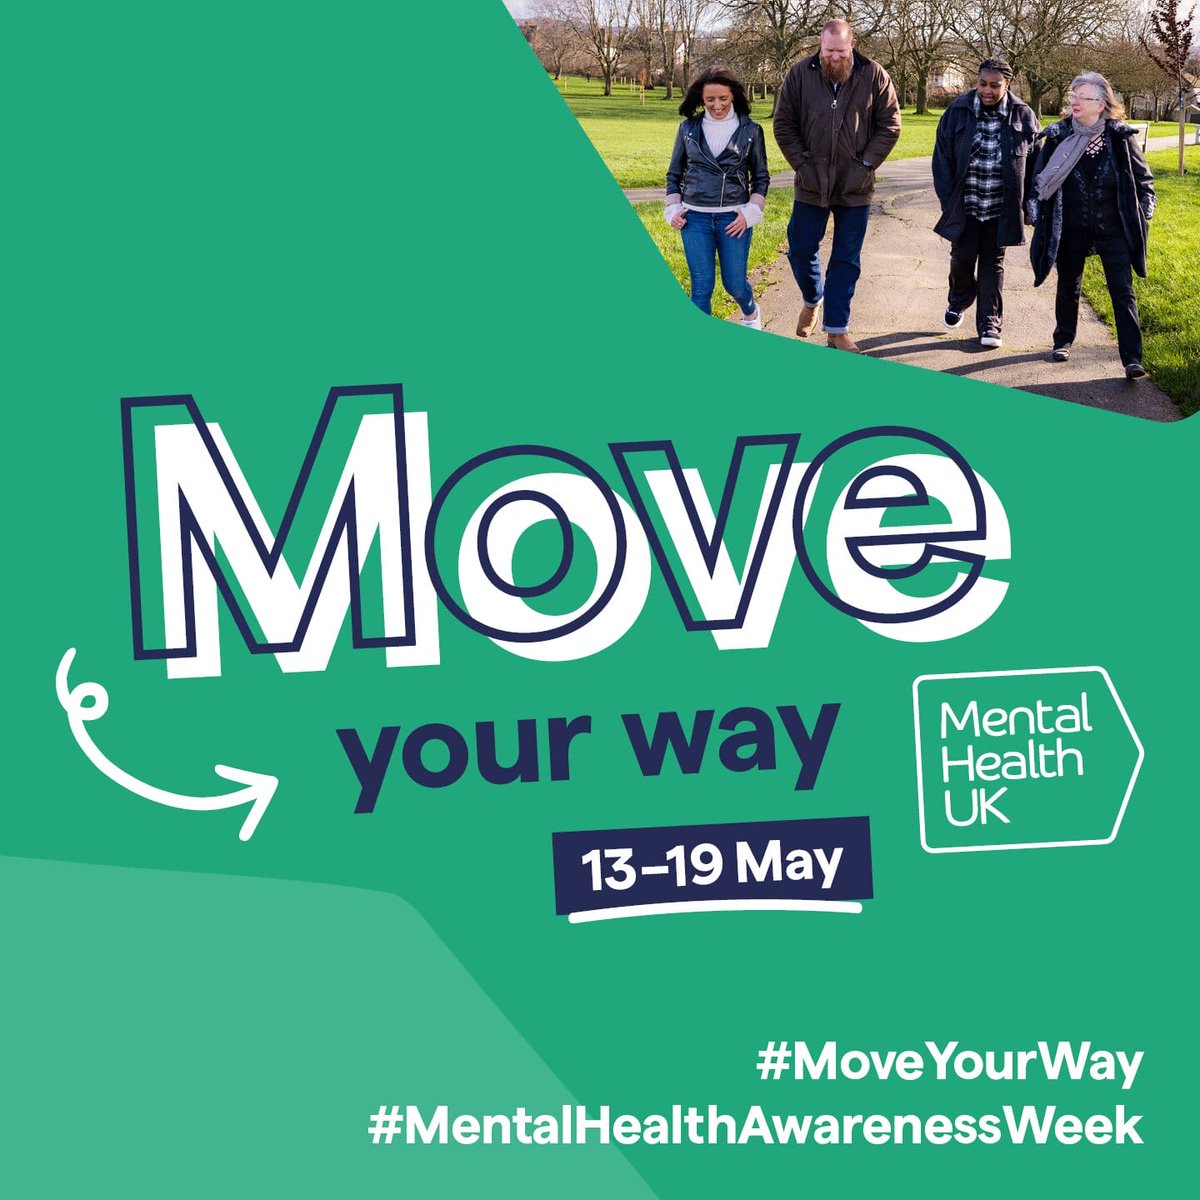 It's Mental Health Awareness Week & the theme is 'Movement.' While exercise is great, movement can be anything that gets you up and going. What's your favourite way to move your body and boost your mood? 🏃 #MentalHealthAwarenessWeek #MoveForMentalHealth #MoveYourWay